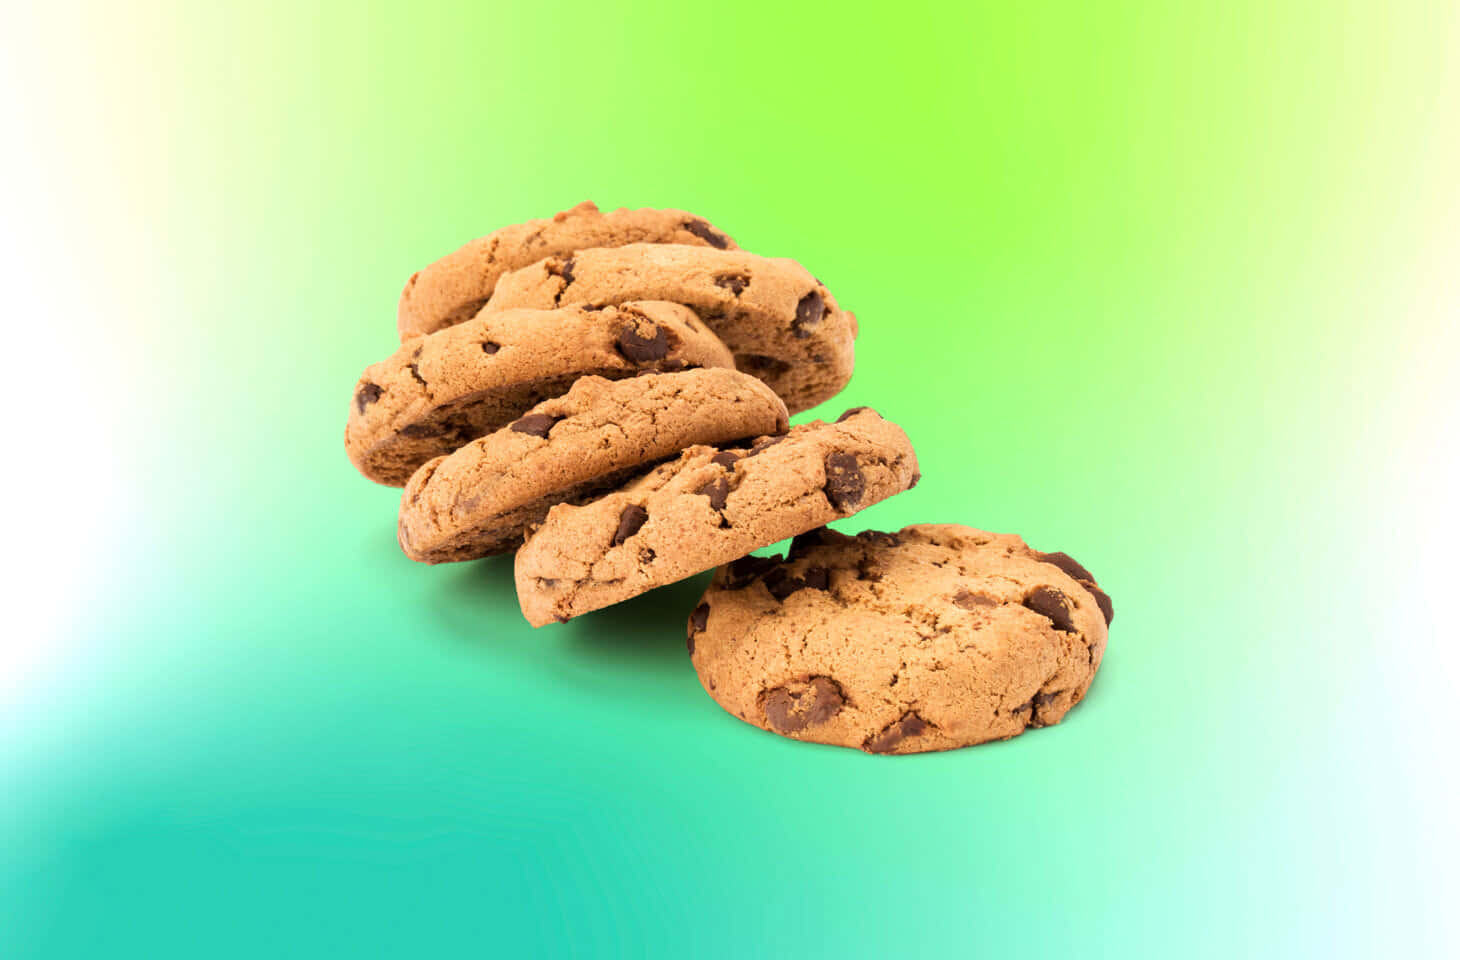 Chocolate Chip Cookies On A Green Background